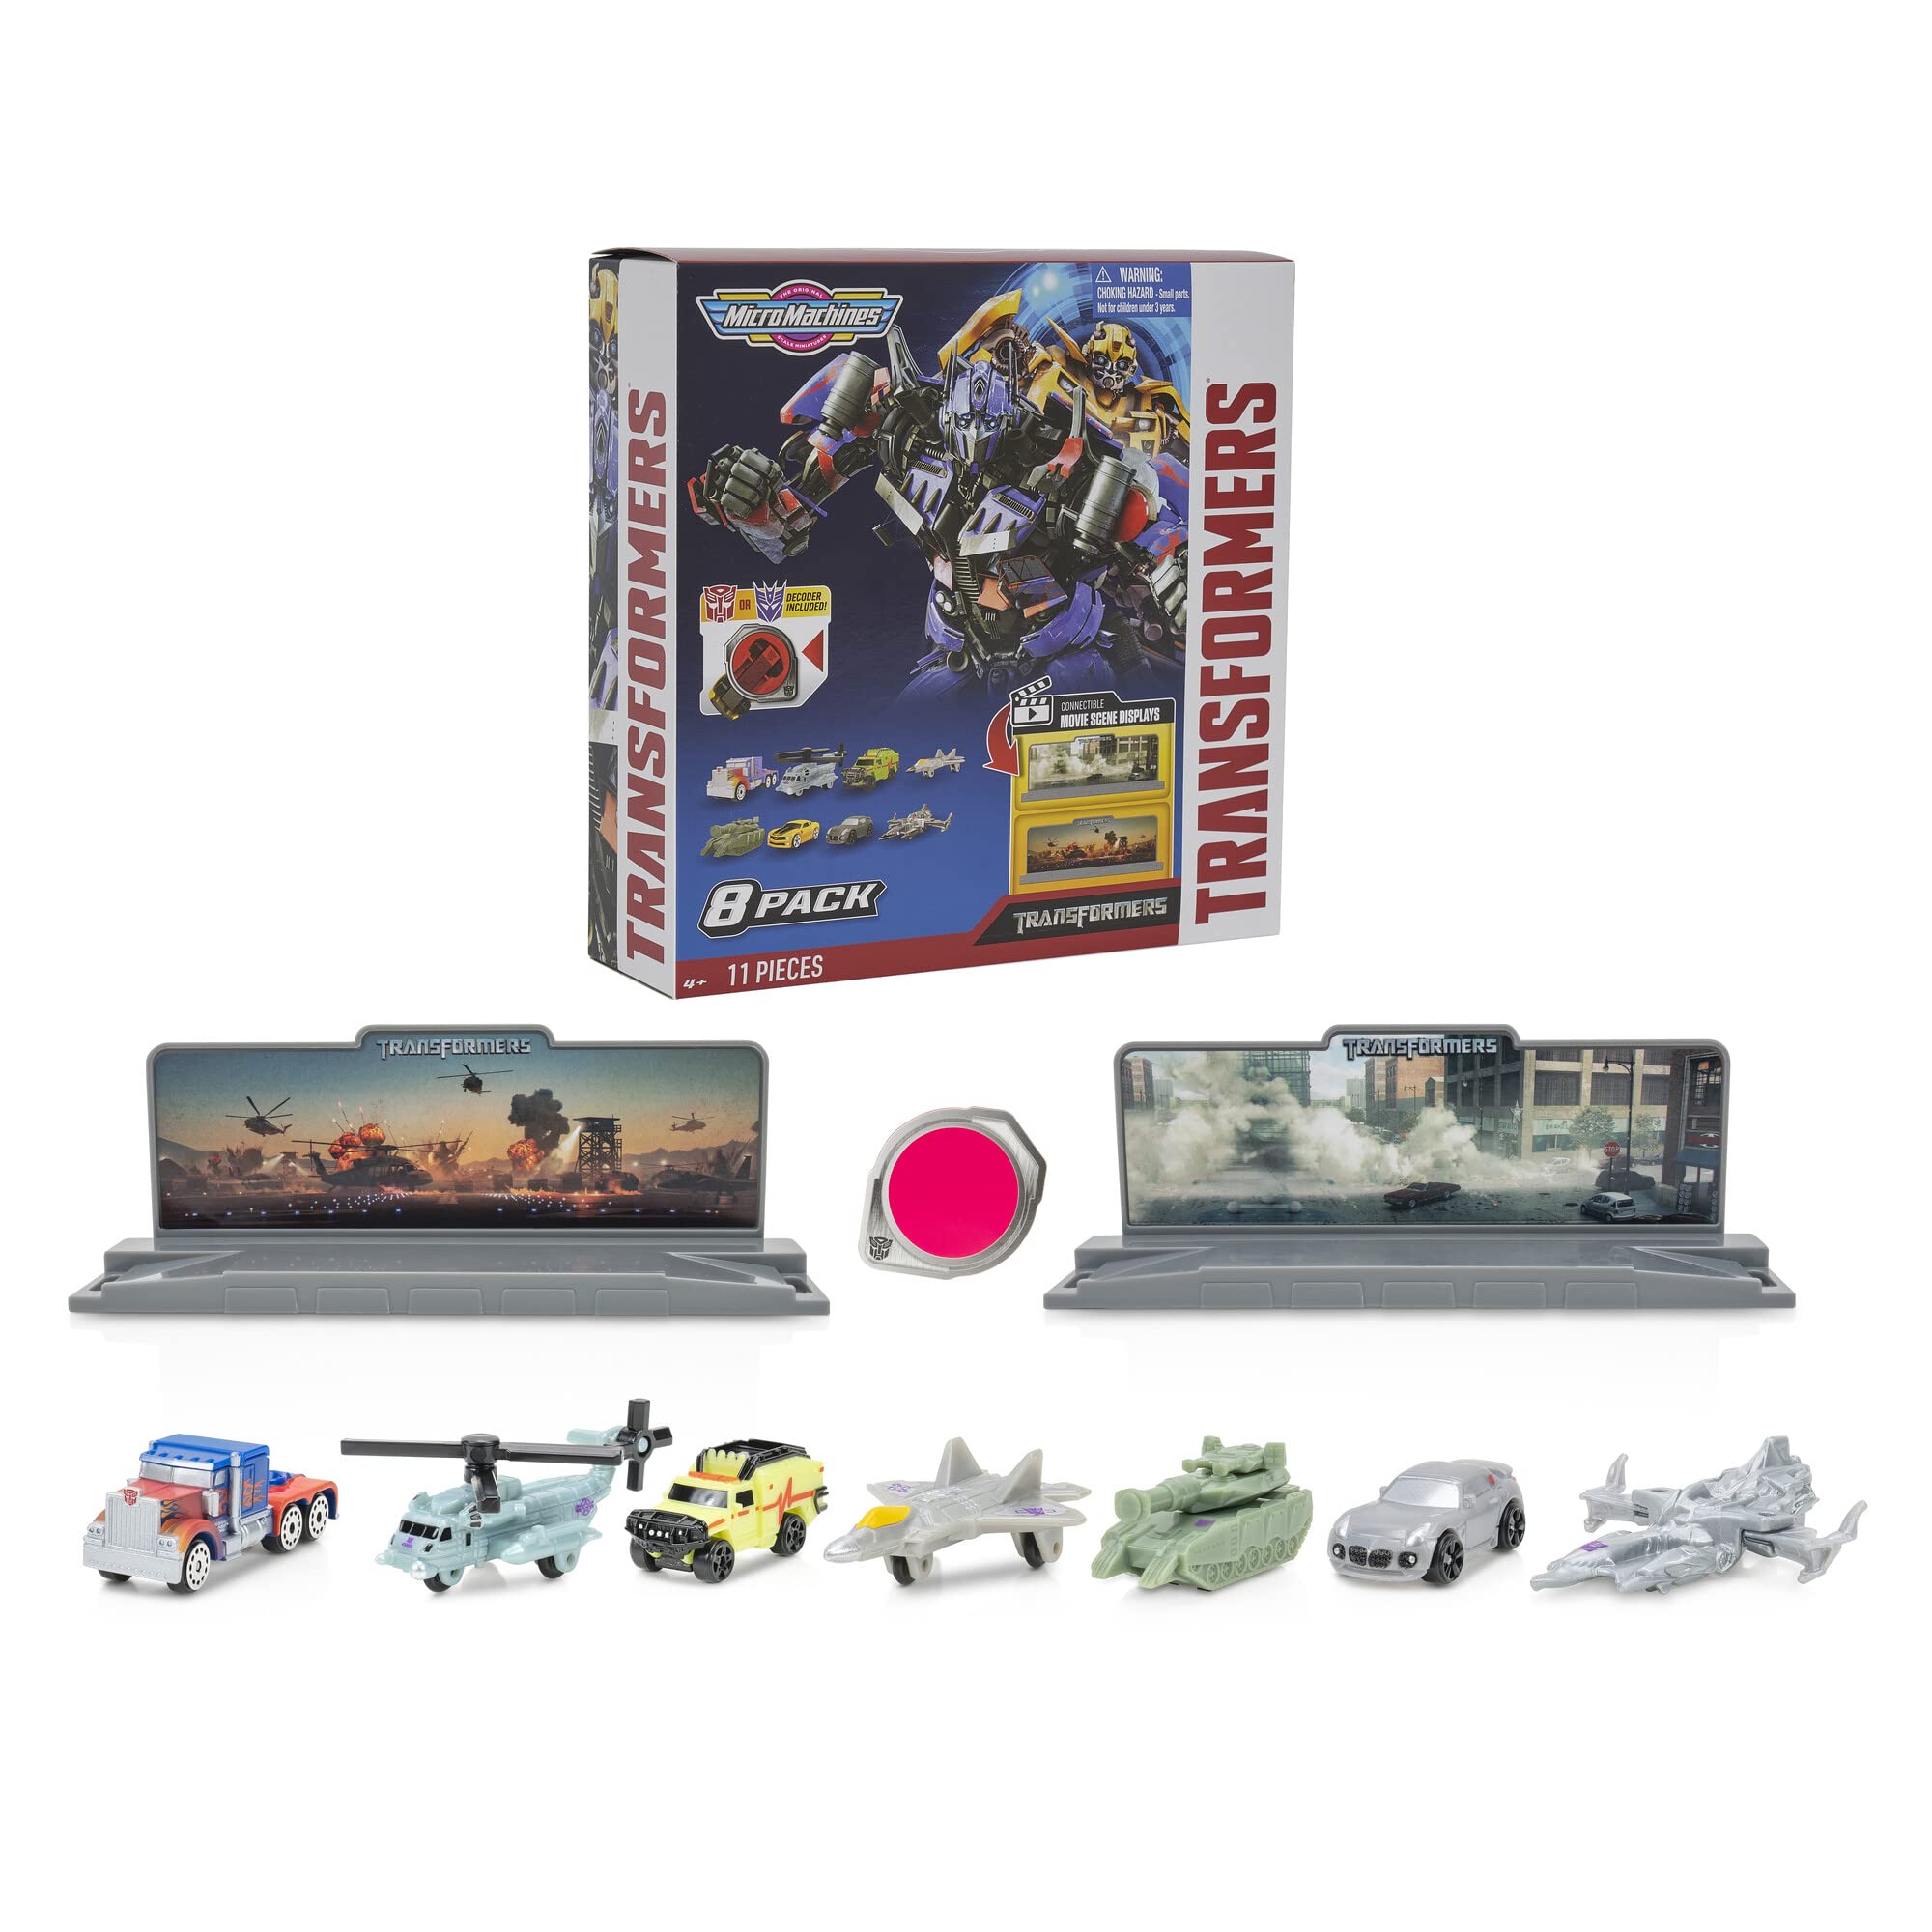 8-Pack Micro Machines Transformers (2007 Movie) Miniature Vehicle Set $11.18 + Free Shipping w/ Prime or on $25+